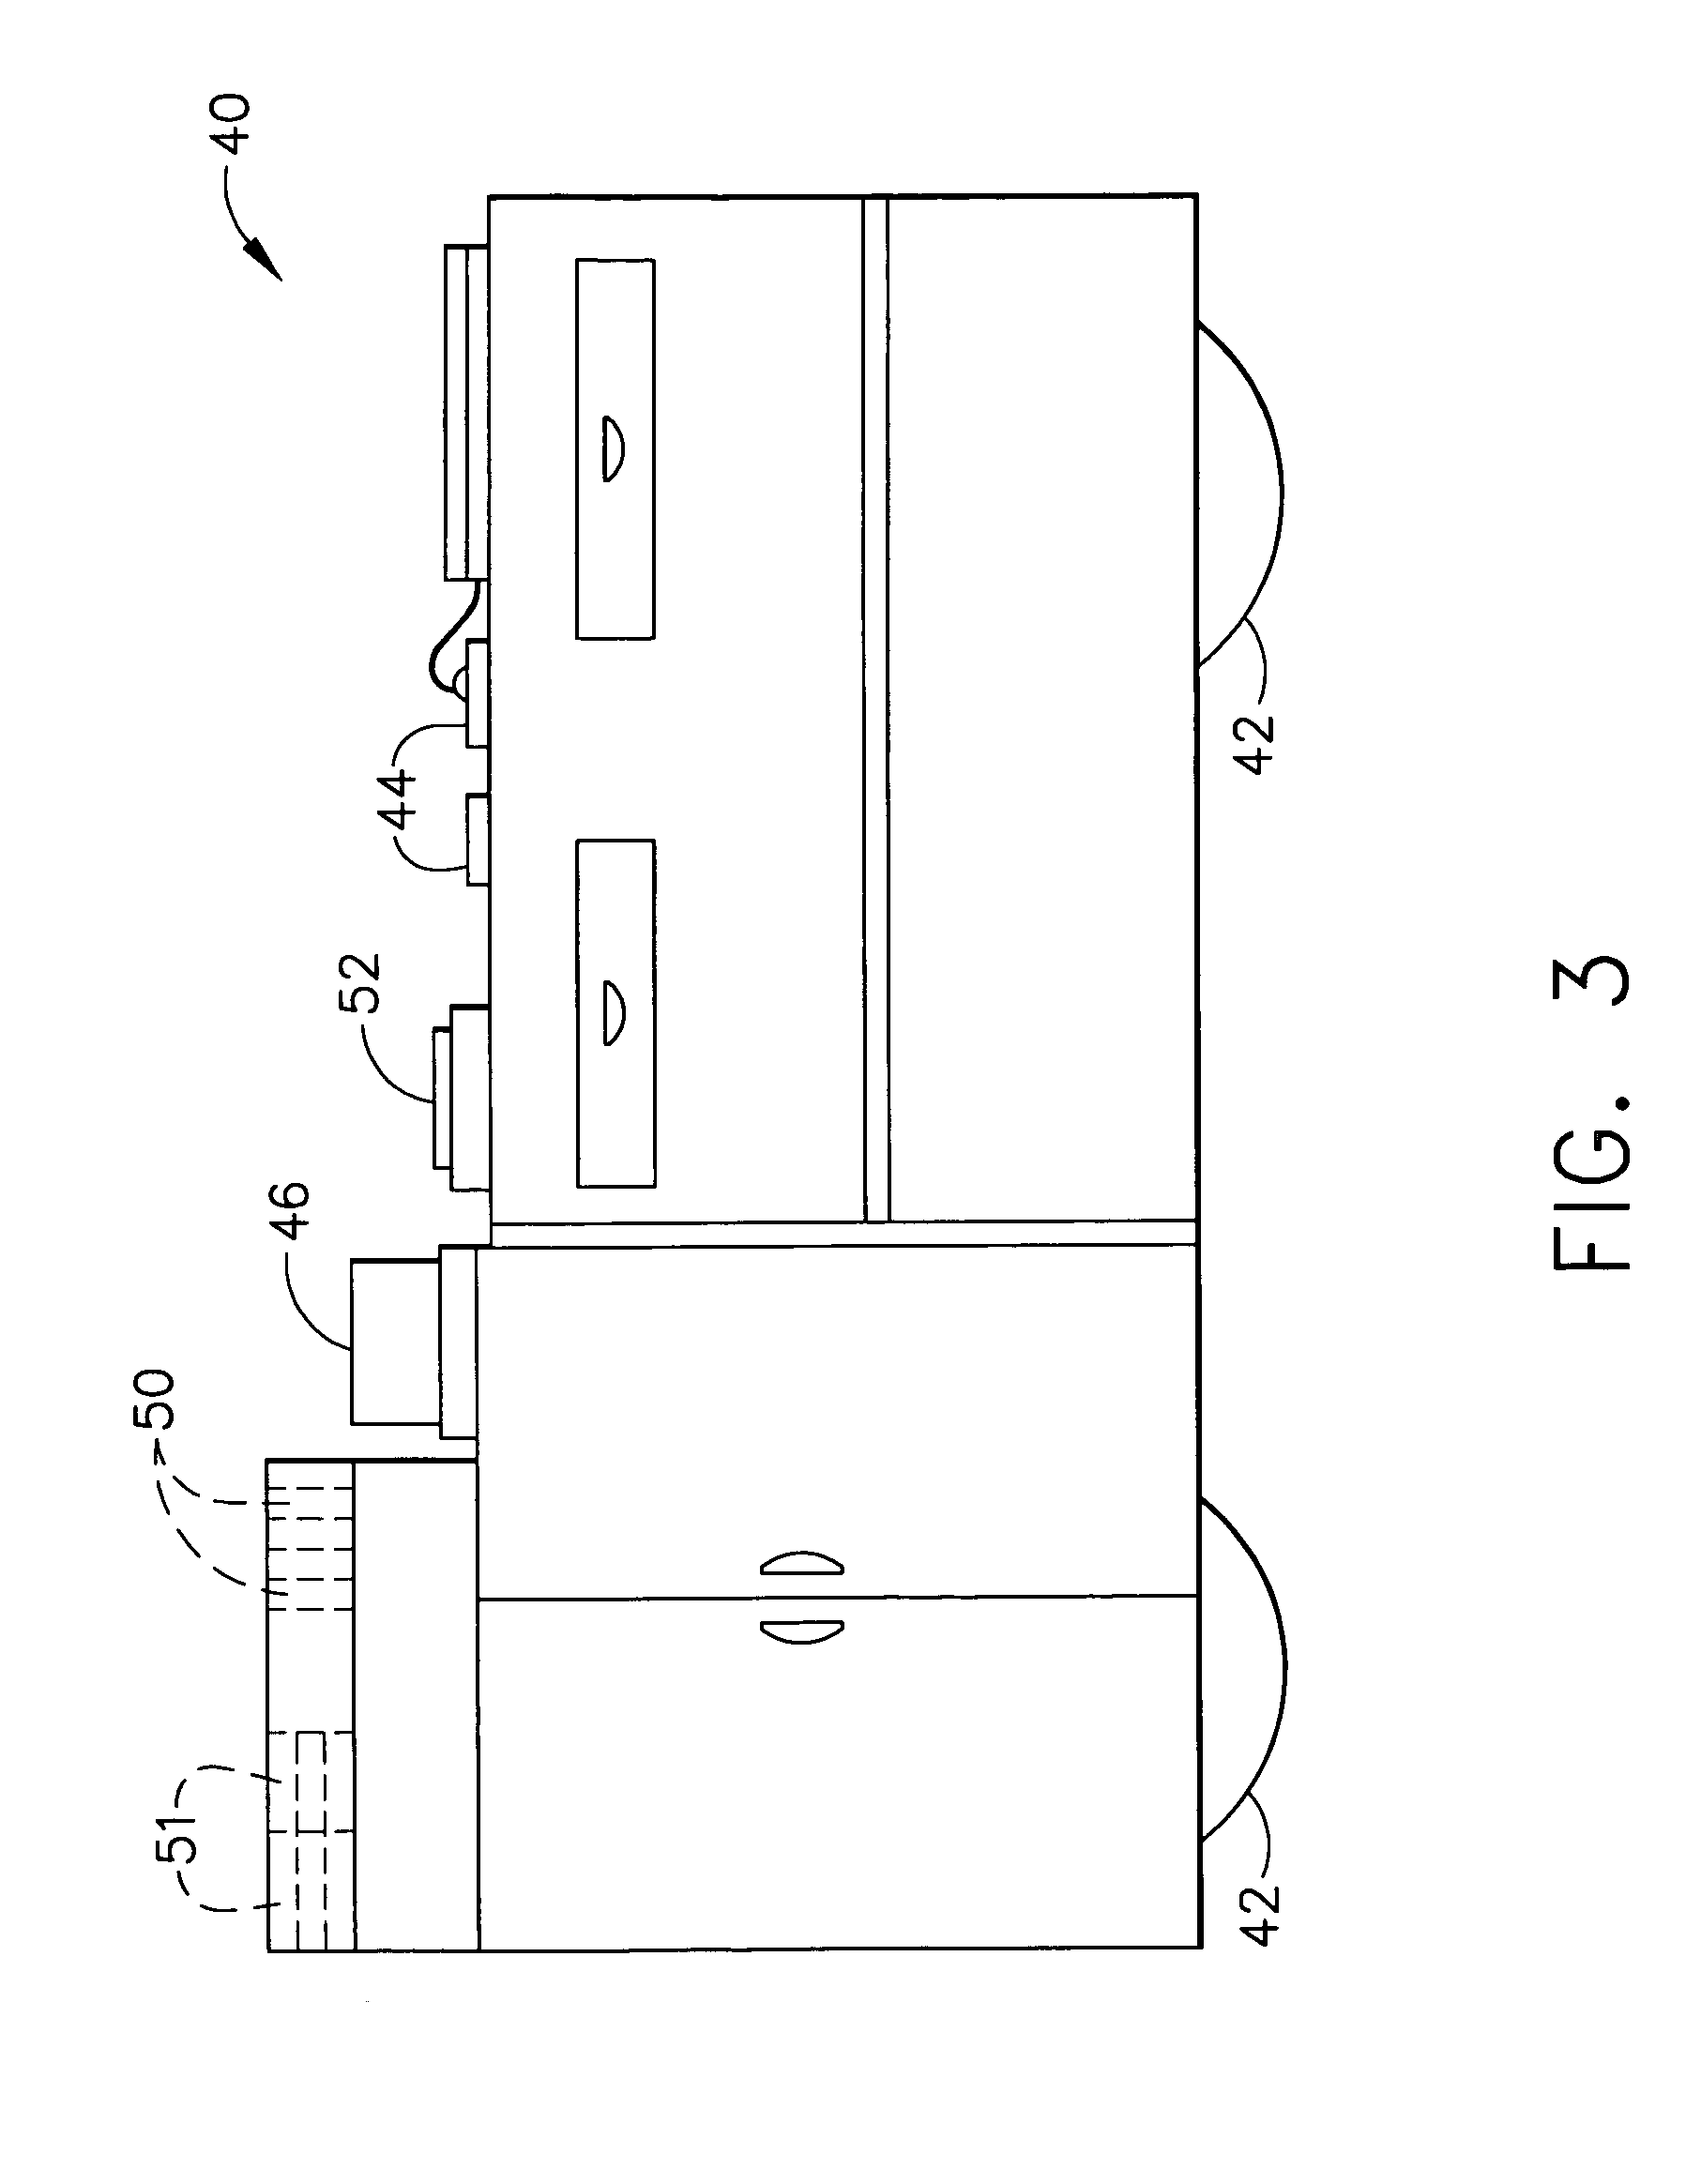 Mobile apparatus for configuring portable devices to be used on-board mobile platforms